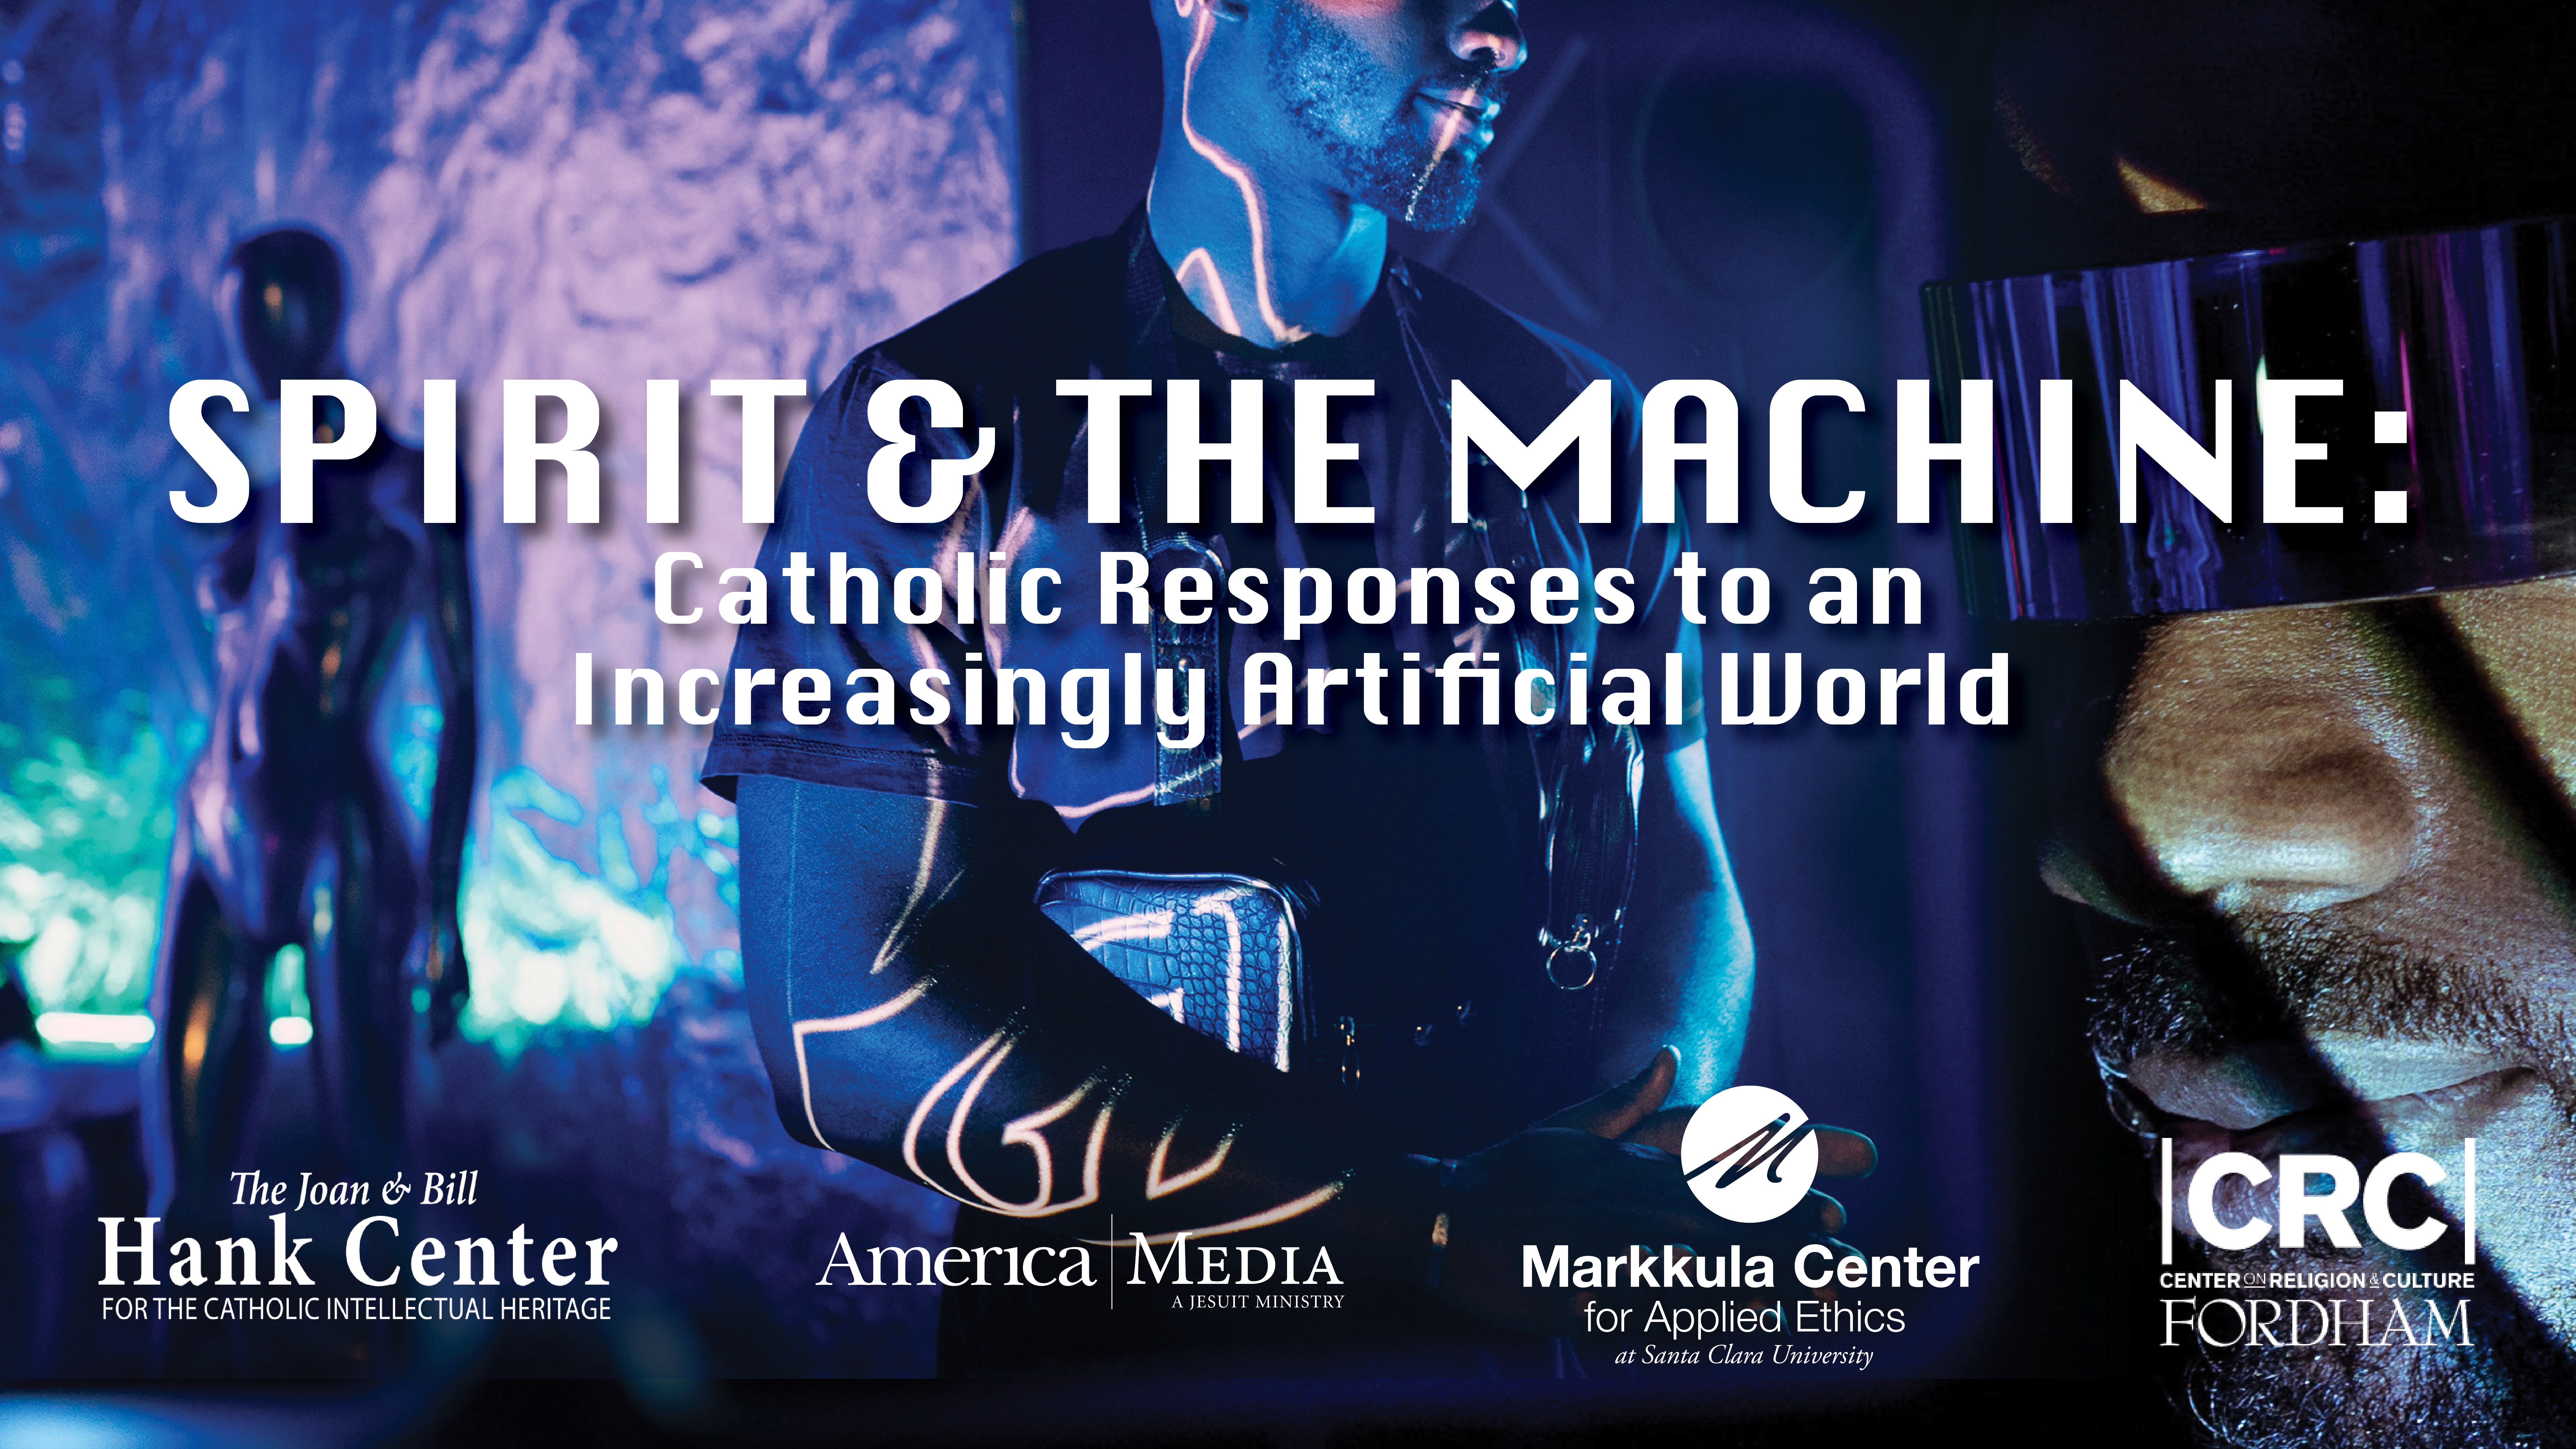 VIDEO AVAILABLE | Spirit and the Machine: Catholic Responses to an Increasingly Artificial World